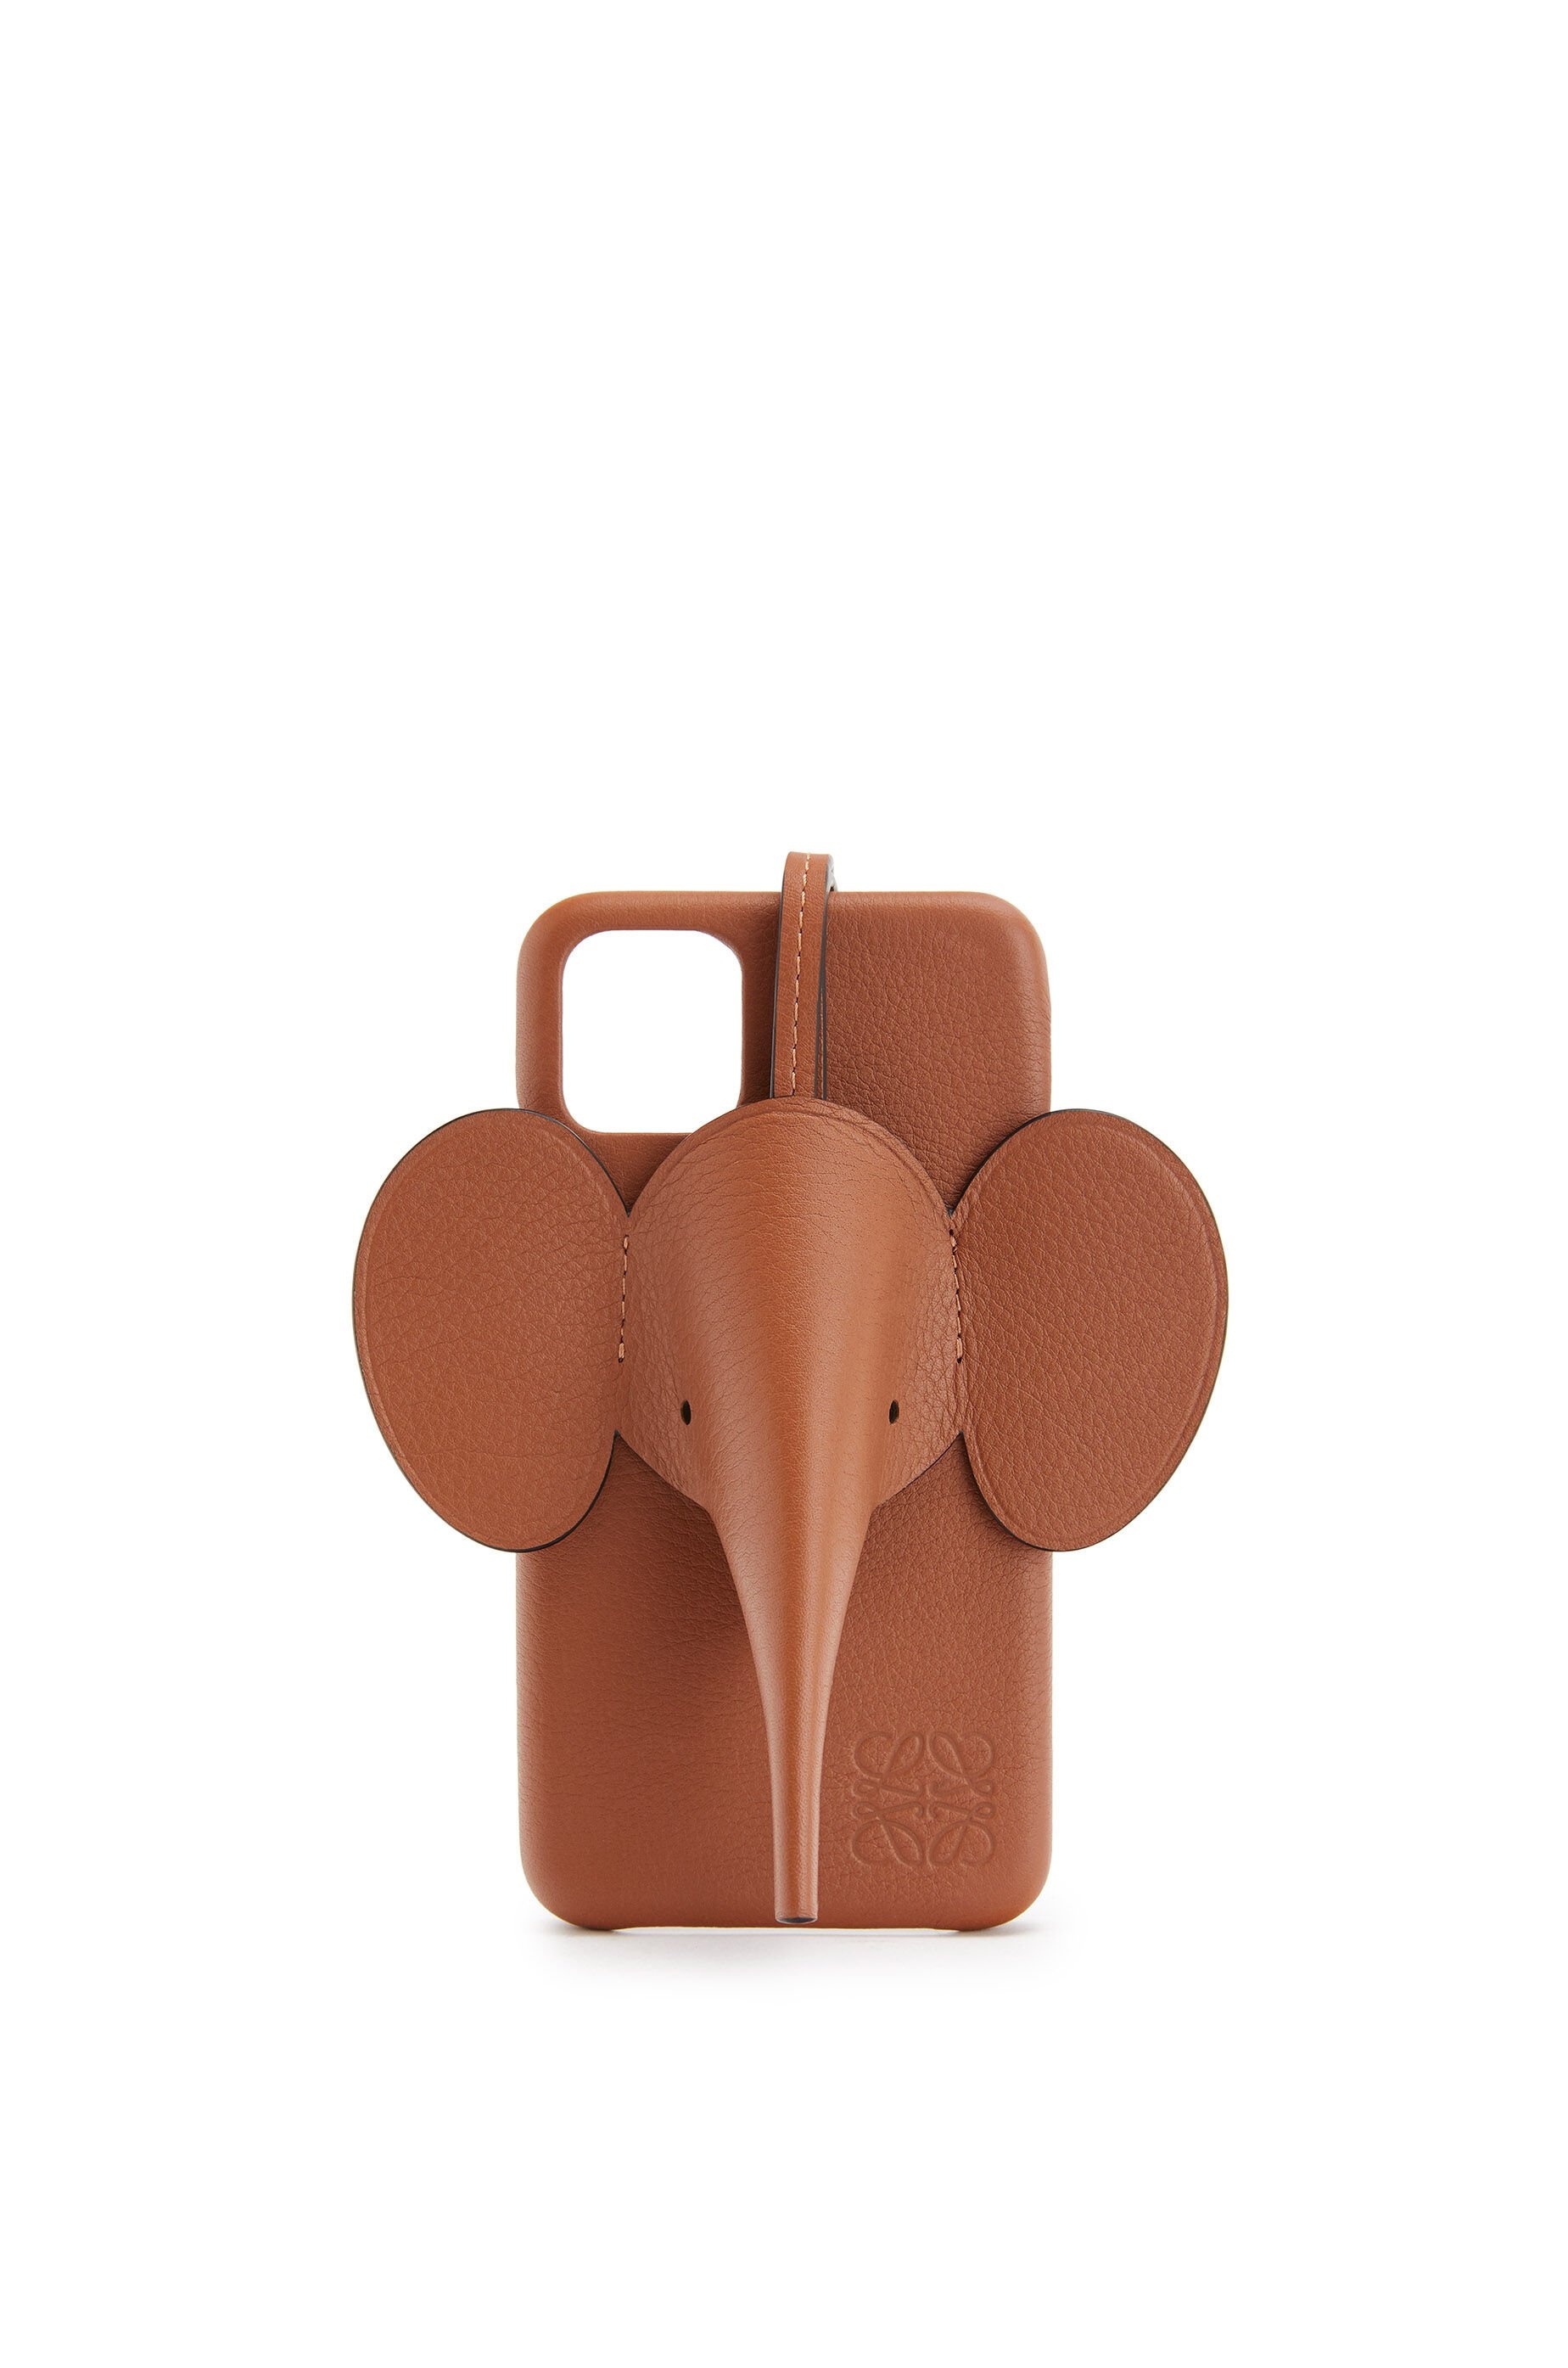 Elephant cover for iPhone 11 in classic calfskin - 1